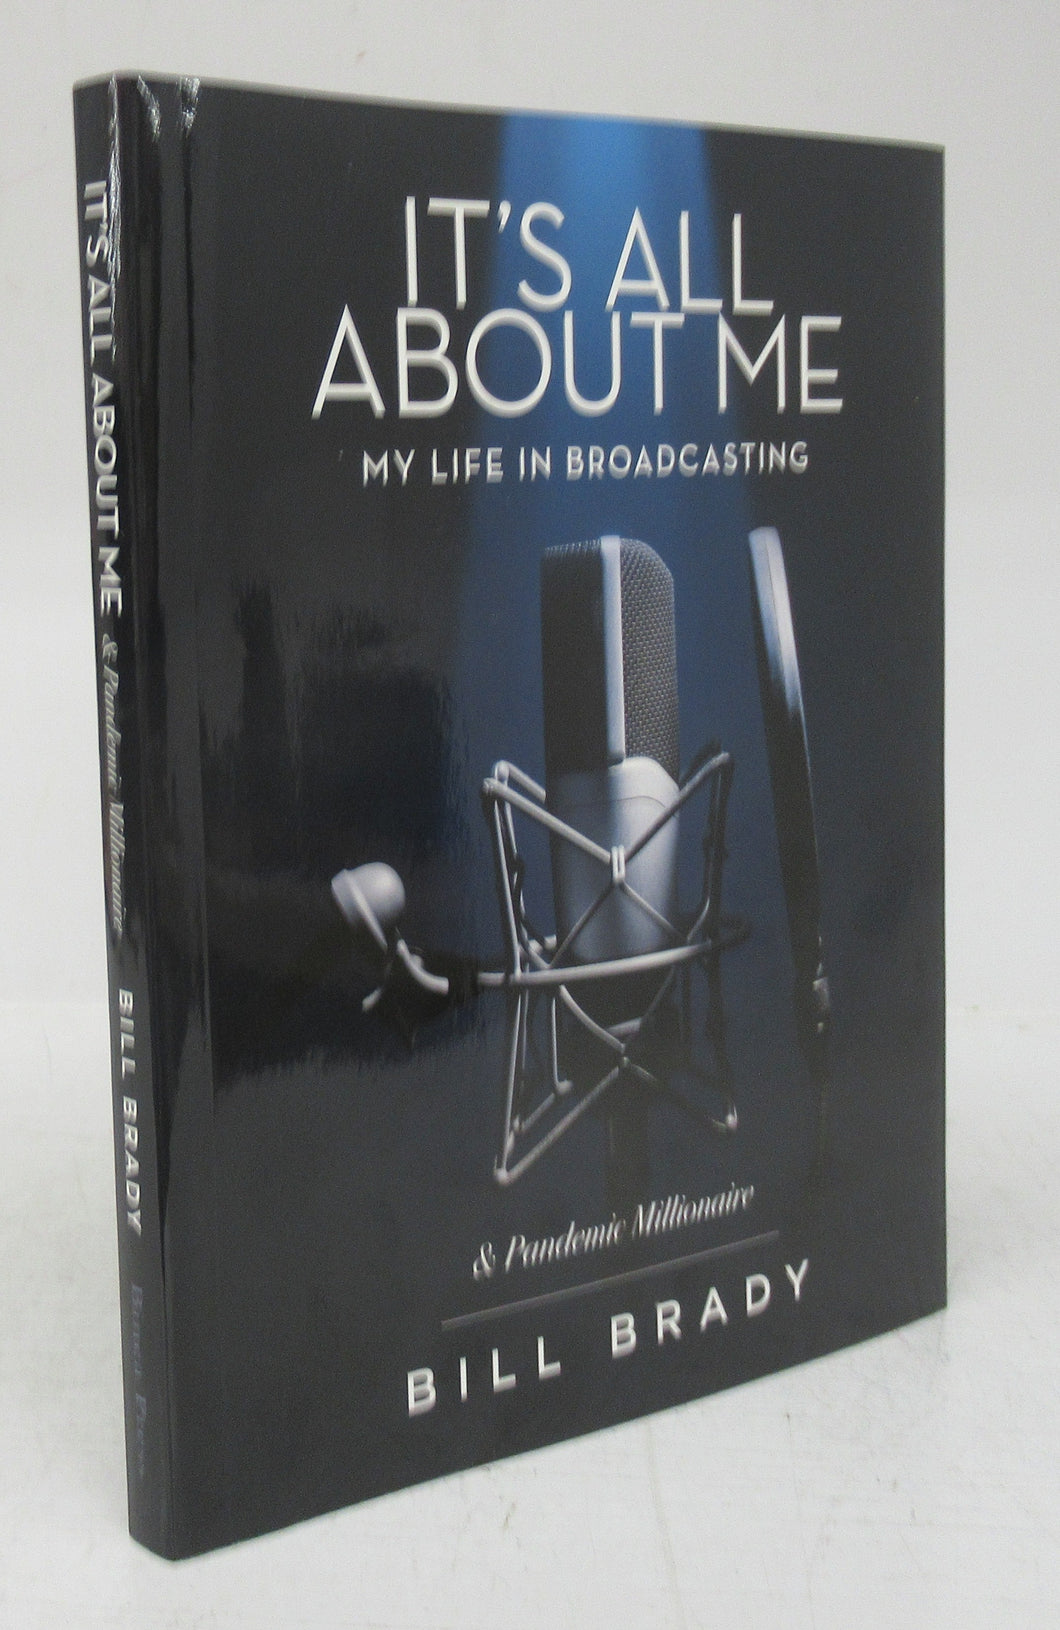 It's All About Me: My Life in Broadcasting (& Pandemic Millionnaire)